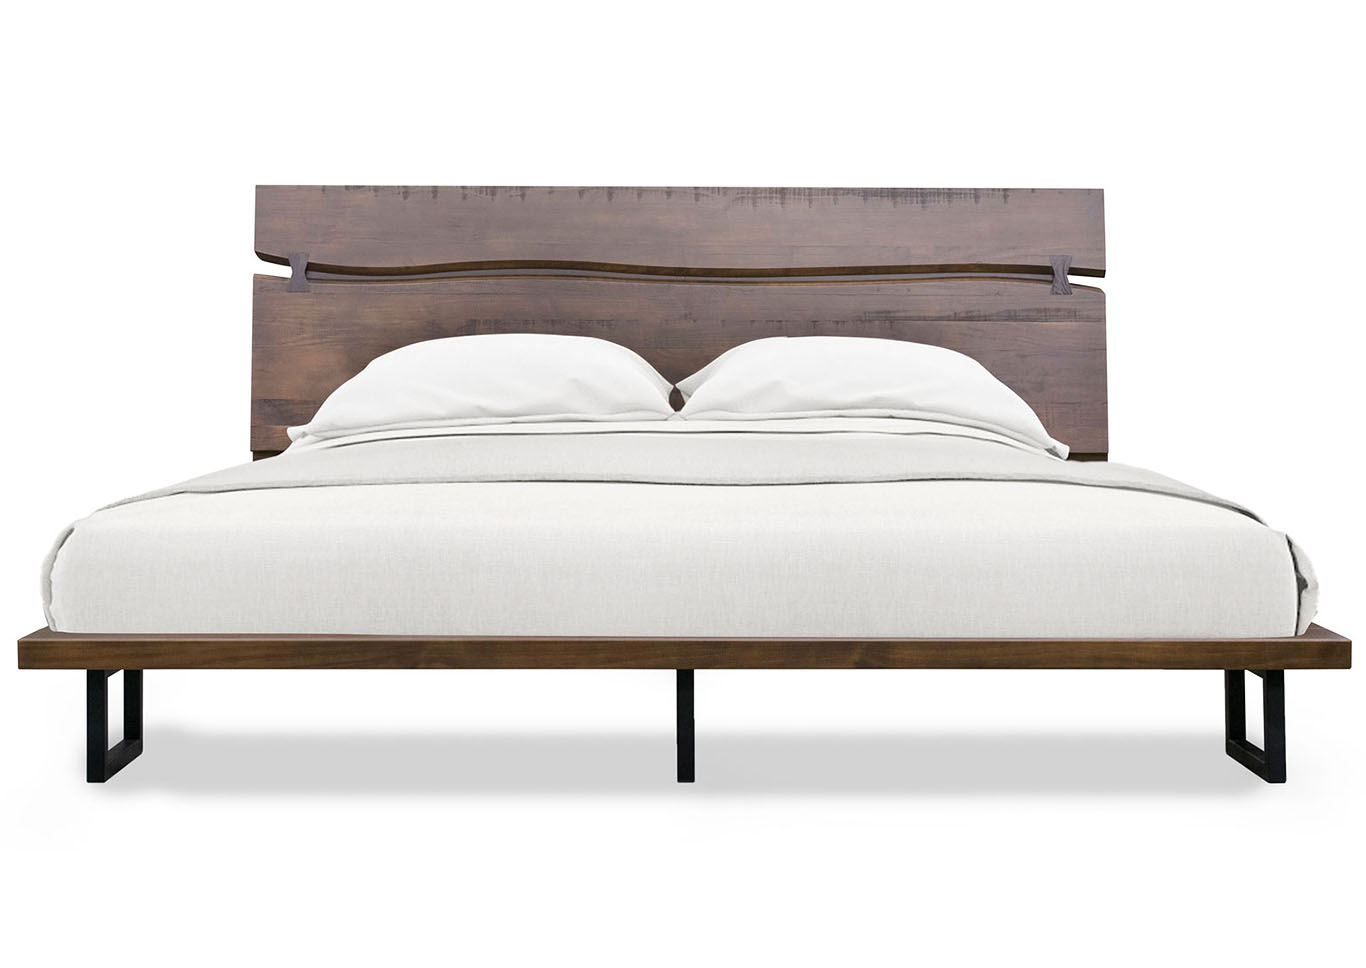 Pasco Brown Panel Queen Bed,Steve Silver